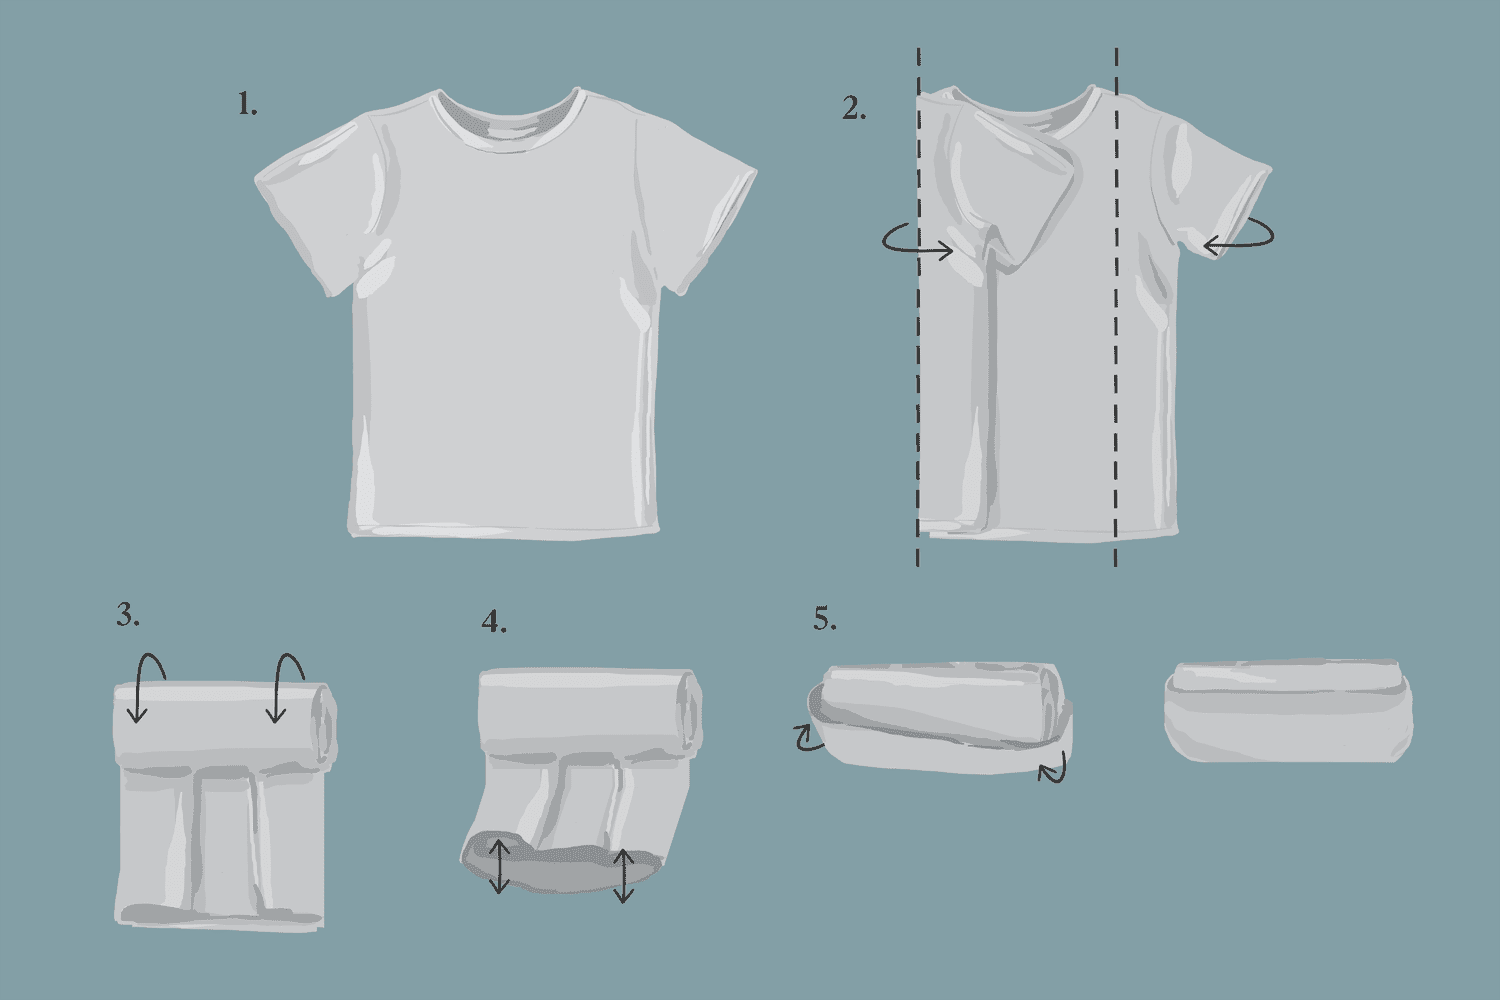 How To Fold T-Shirts For Travel Wrinkle Free?